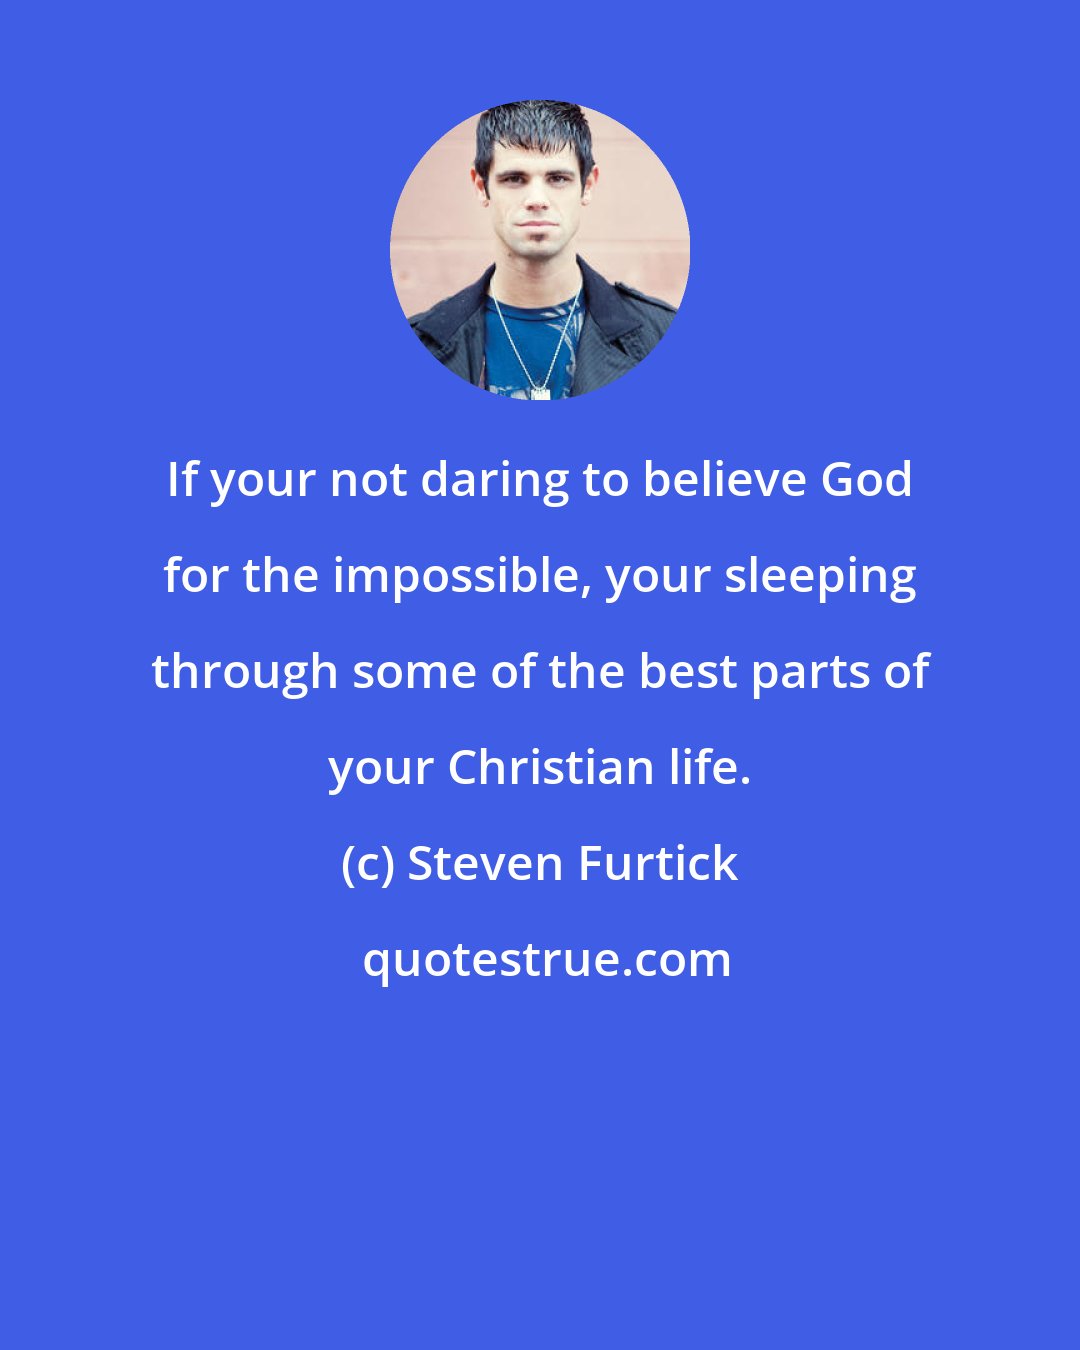 Steven Furtick: If your not daring to believe God for the impossible, your sleeping through some of the best parts of your Christian life.